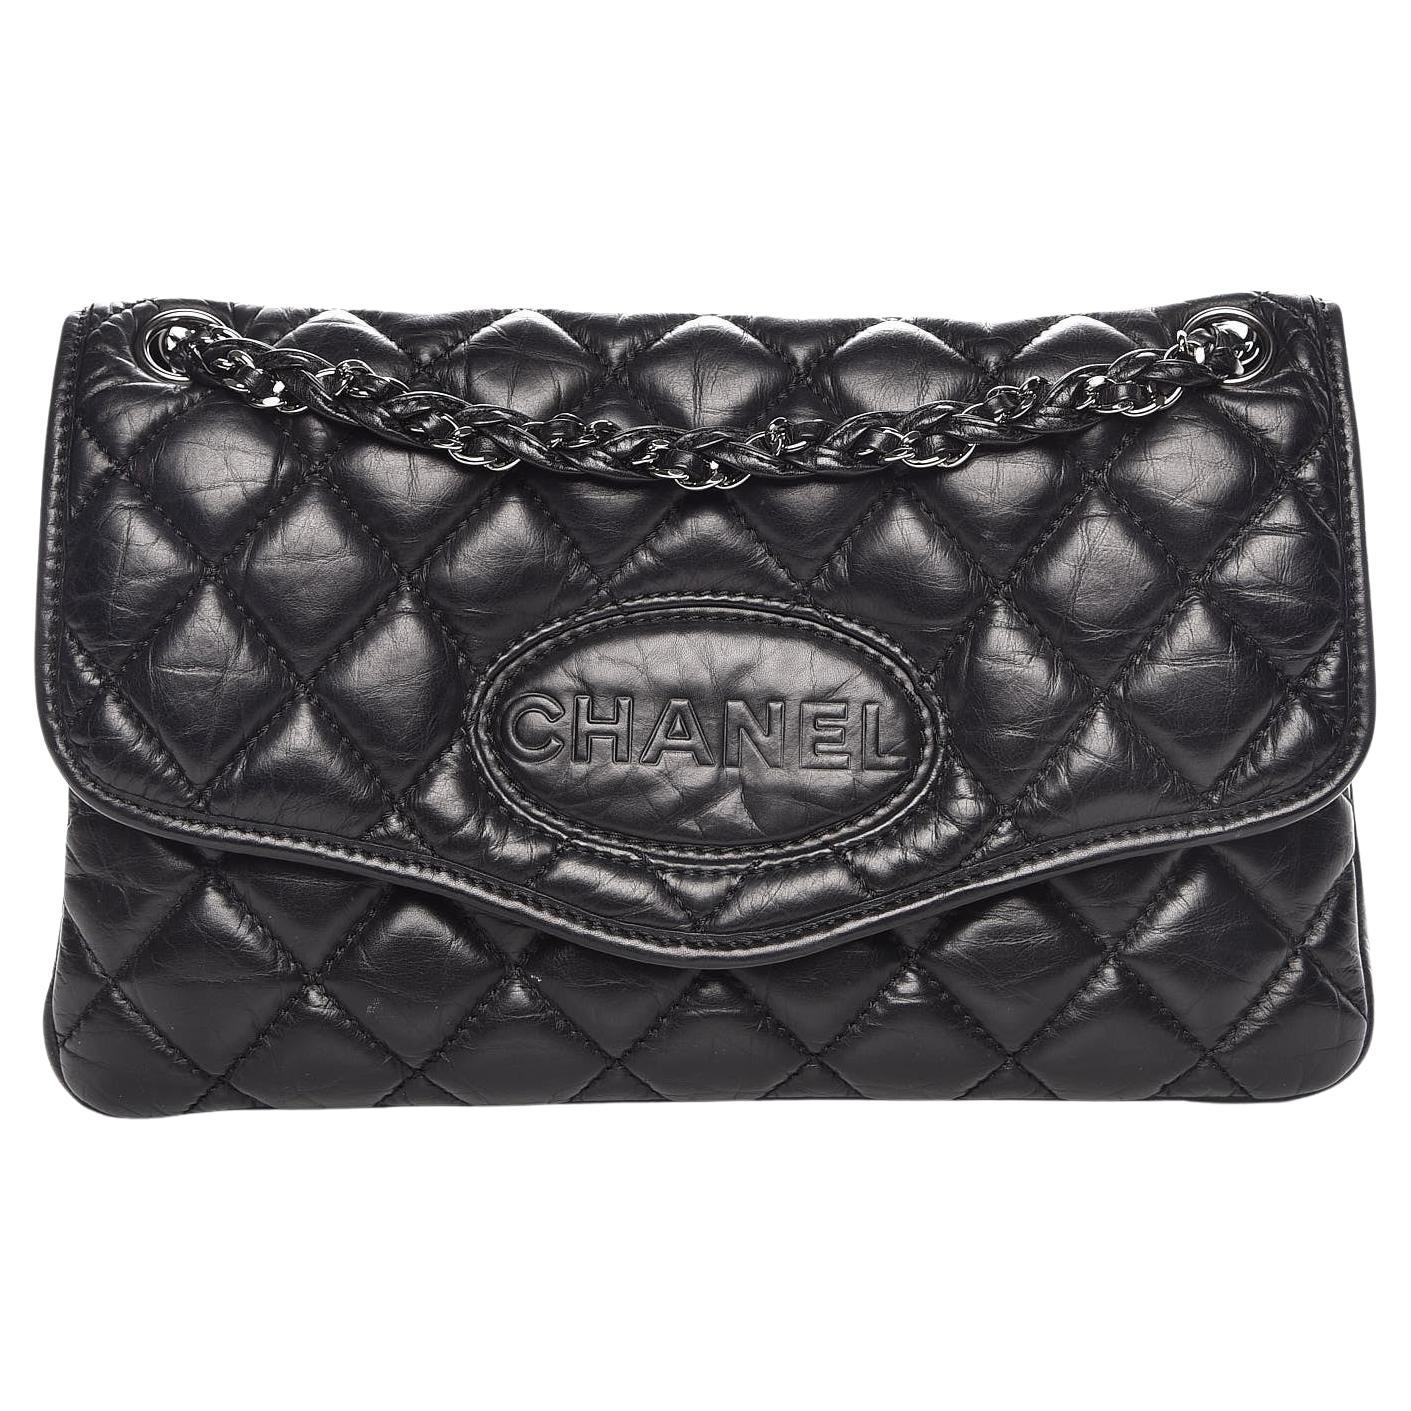 Chanel 2005 Vintage Soft Distressed Leather Diamond Quilted Classic Flap Bag For Sale